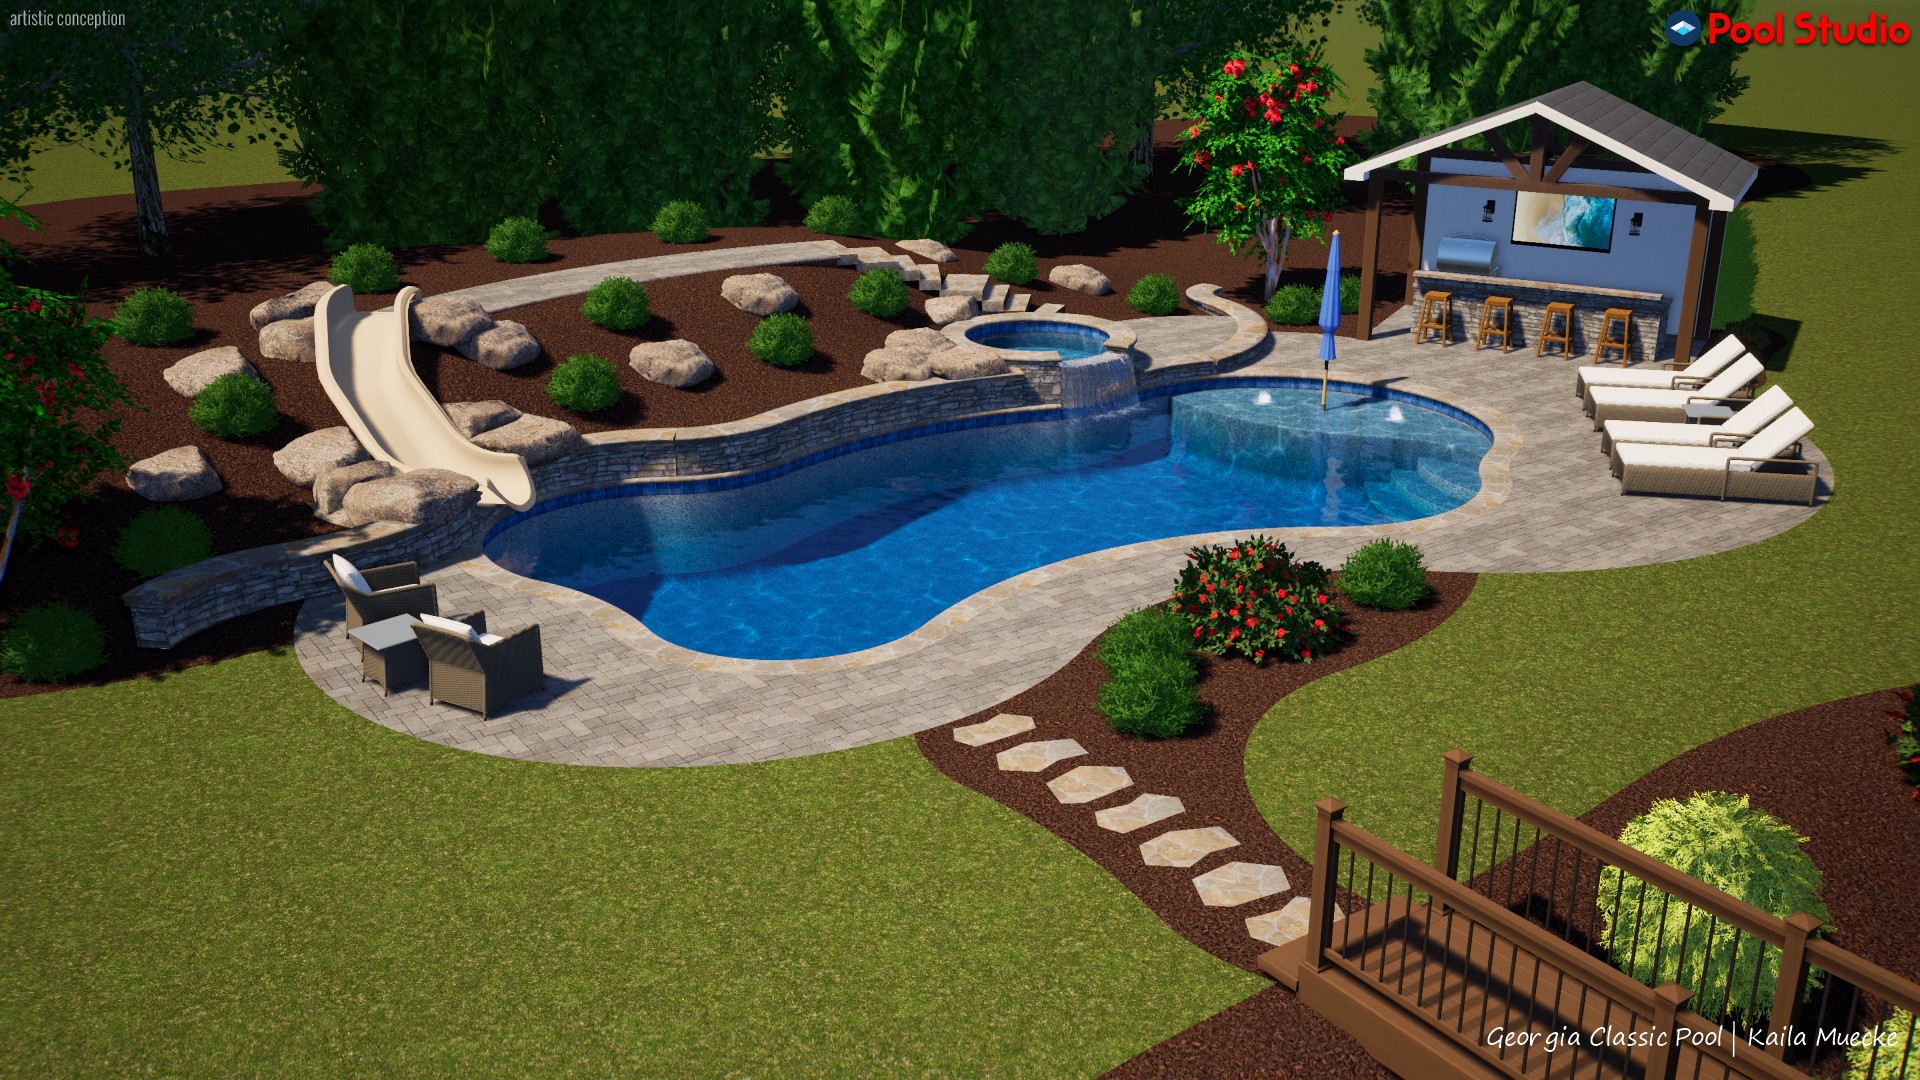 A 3D rendering of a modern pool with an attached spa and slide.